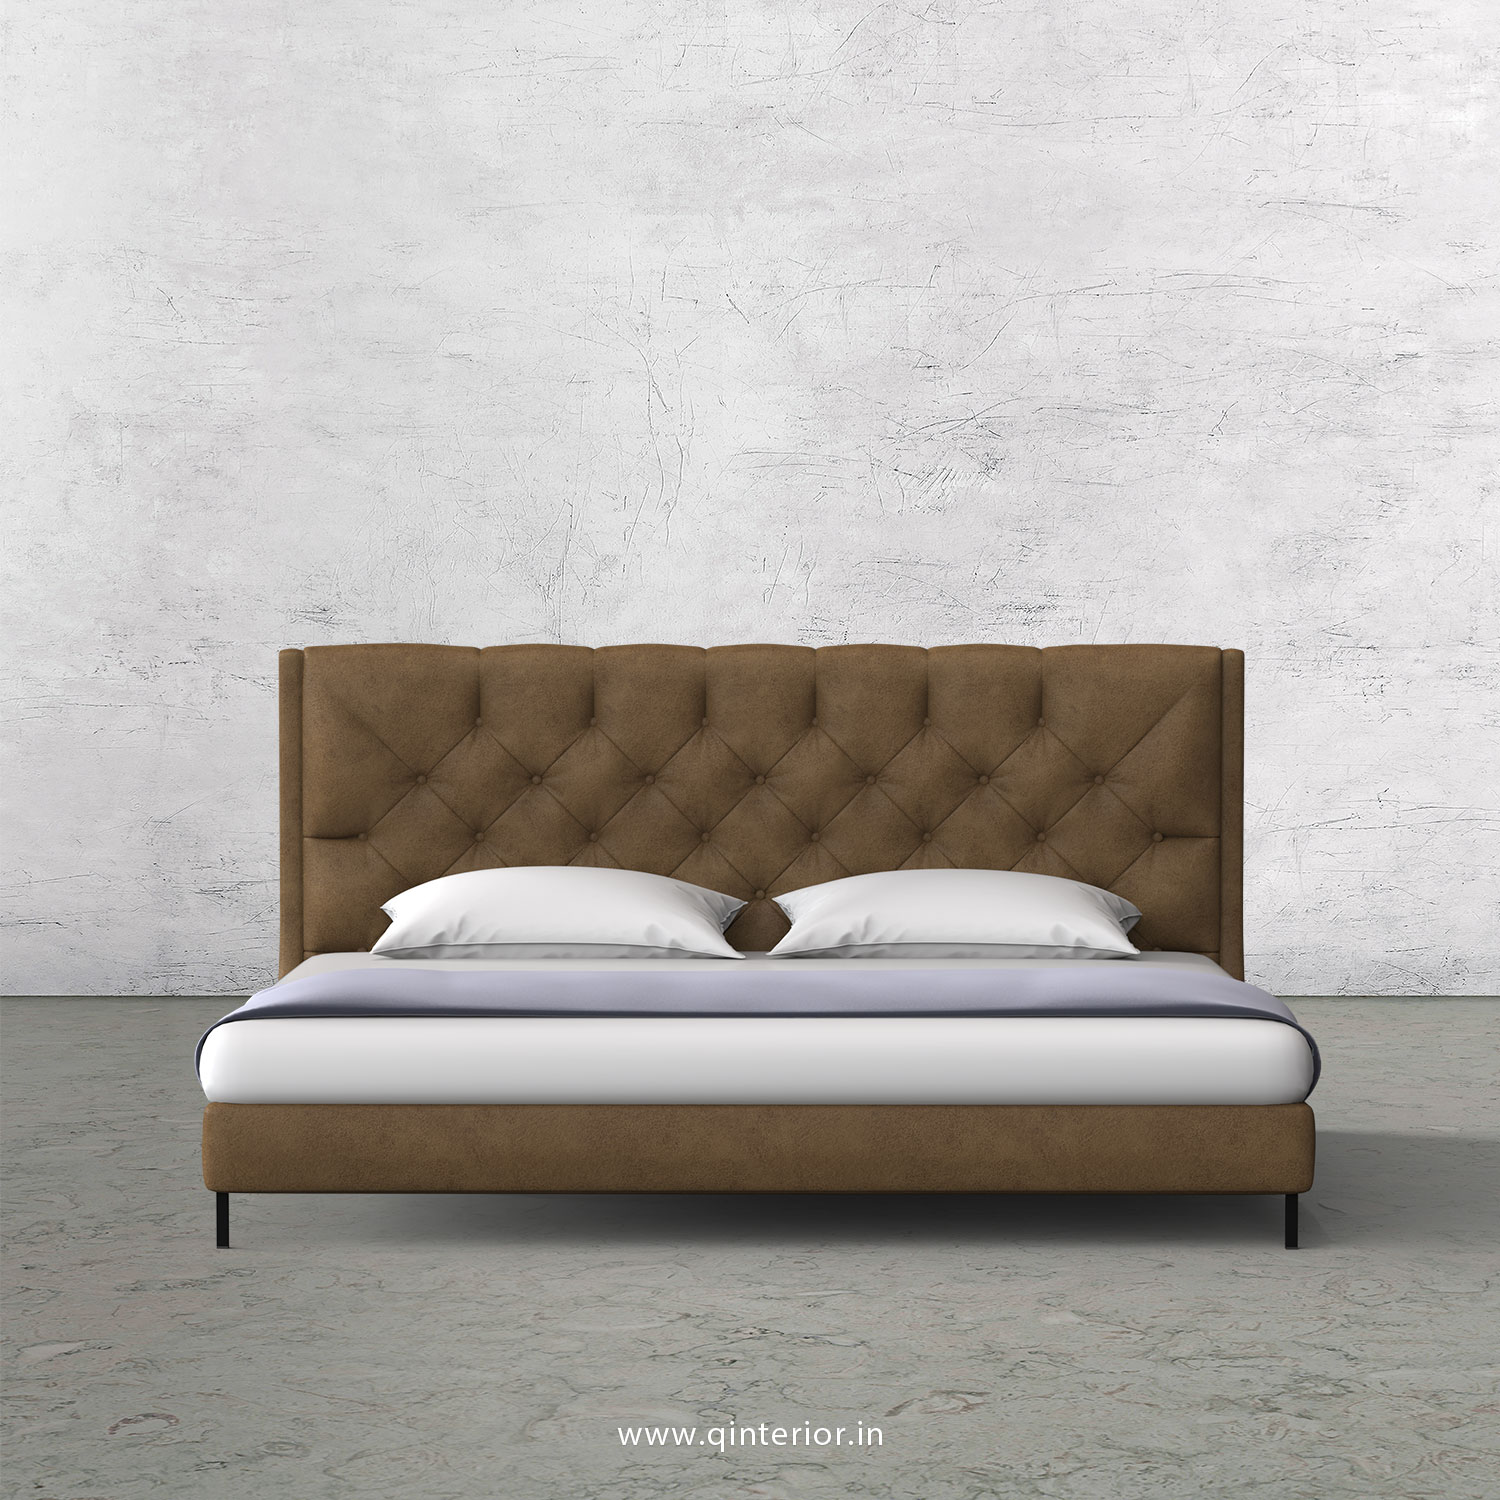 Scorpius King Size Bed in Fab Leather Fabric - KBD003 FL02